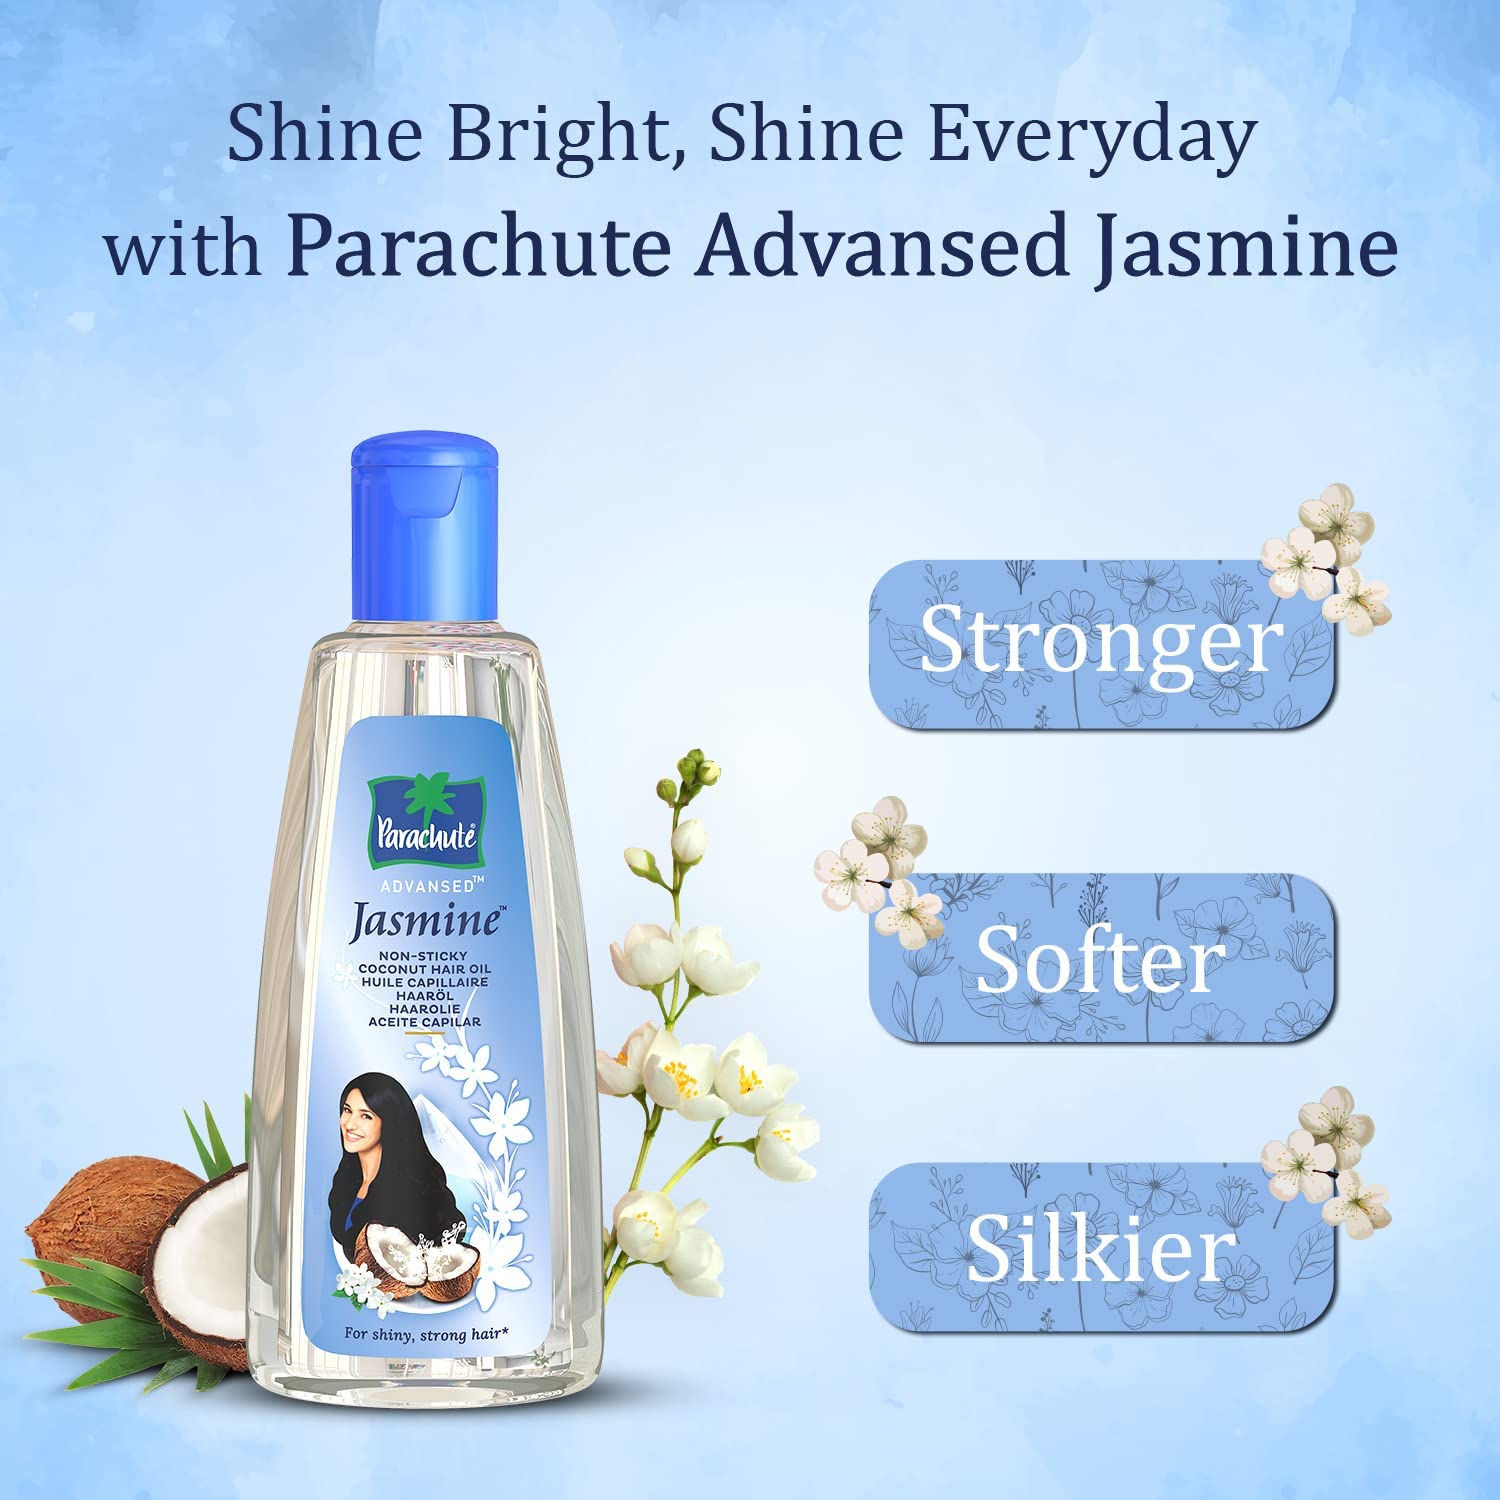 Foxyin  Buy Parachute Advansed Jasmine Coconut NonSticky Hair Oil  400ml  90ml free online in India on Foxy Free shipping watch expert  reviews